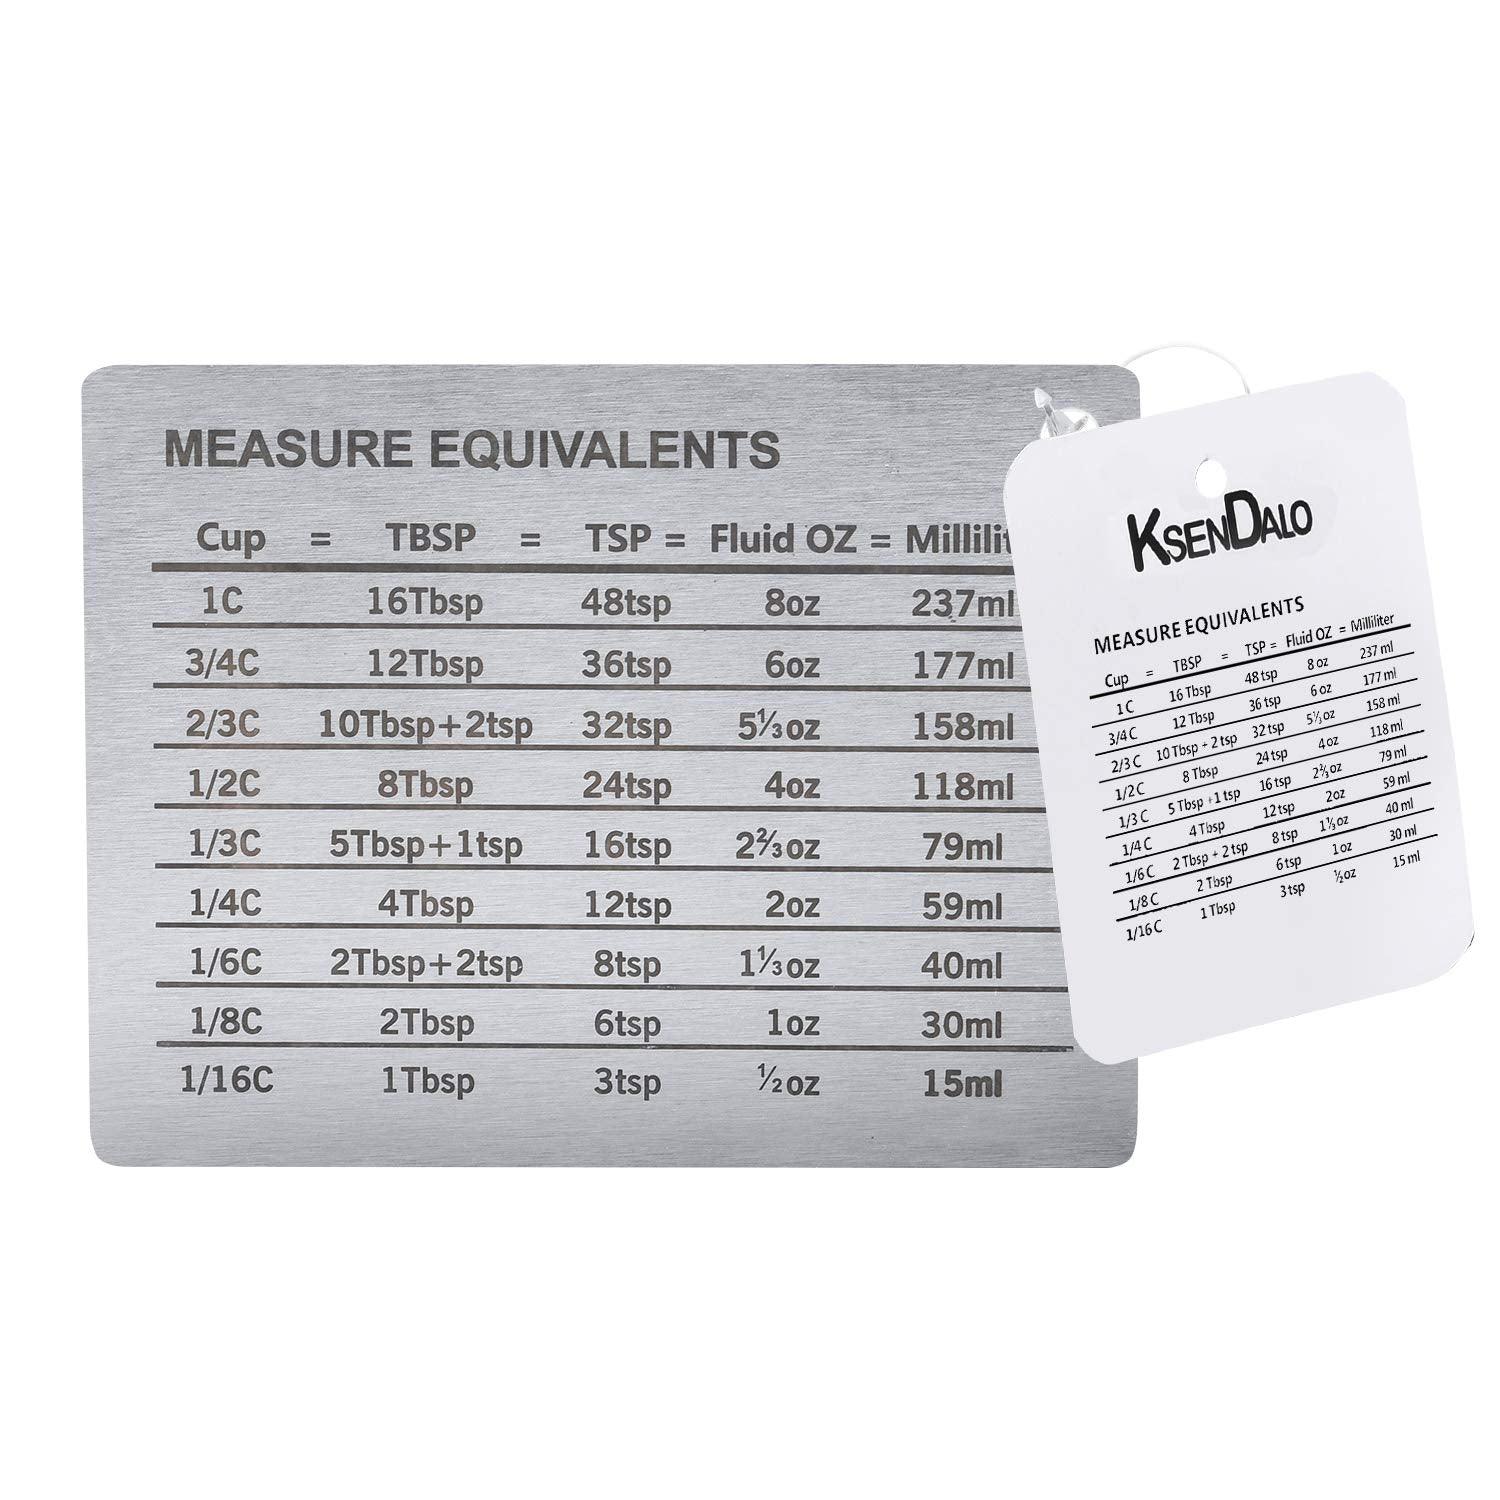 Measurement Conversion Chart with Strong Magnet Backing, KSENDALO Stainless Measurement Conversions For Cups, Tablespoons, Teaspoons, Fluid Oz and Milliliters,Silver - CookCave